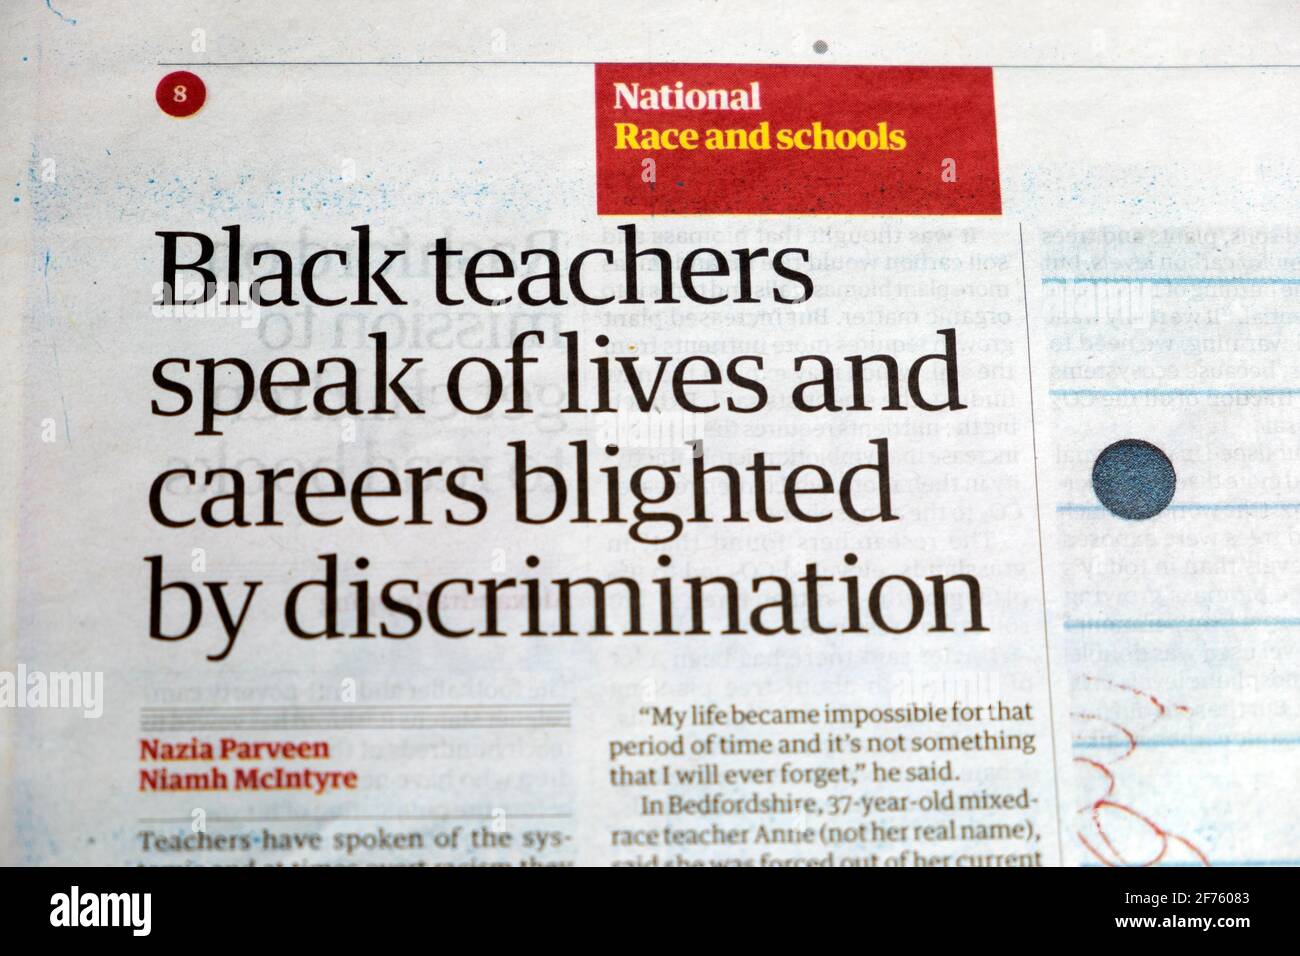 Race and schools 'Black teachers speak of lives and careers blighted by discrimination' newspaper headline article  25 March 2021 London England UK Stock Photo